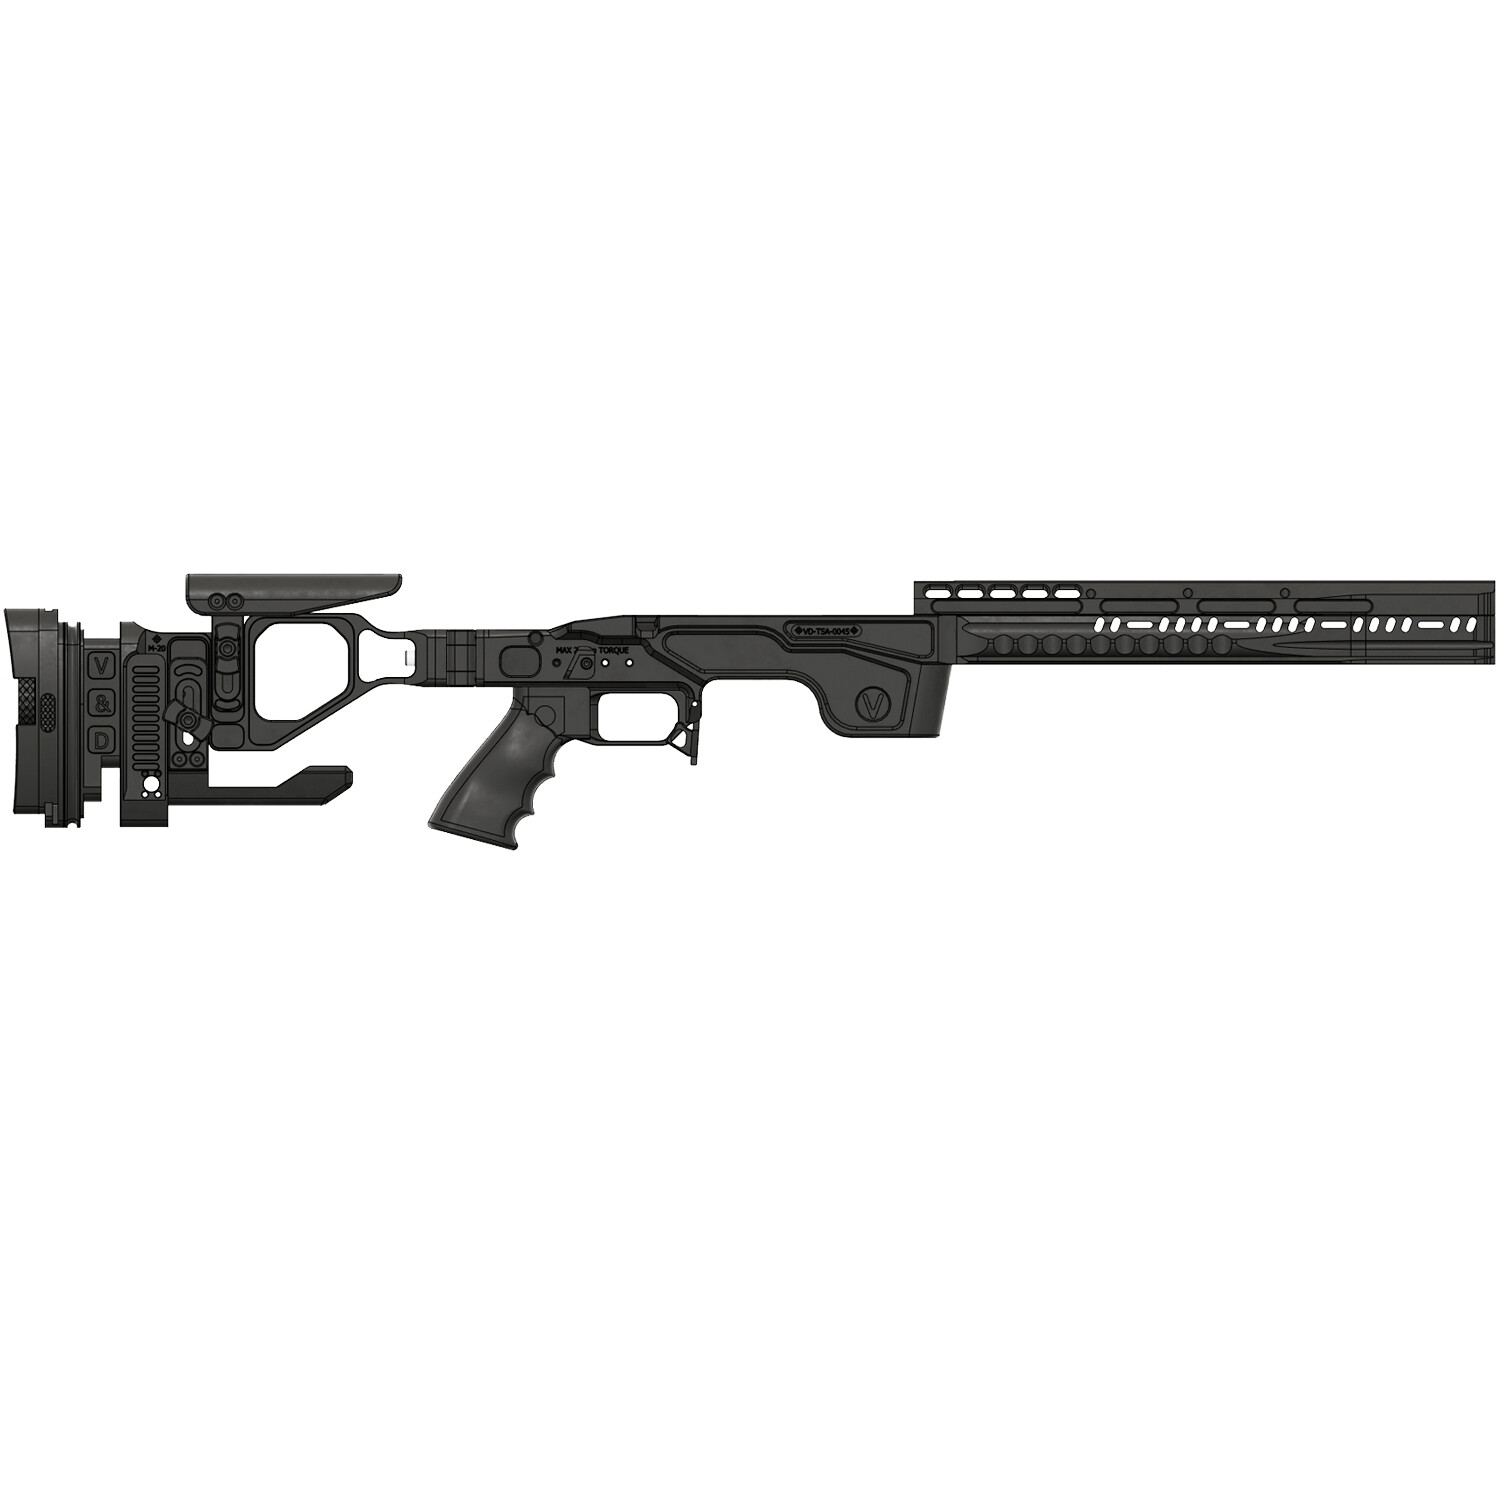 Vision & Design Chassis for Tikka T3 S/A with Flat Top Frontguard